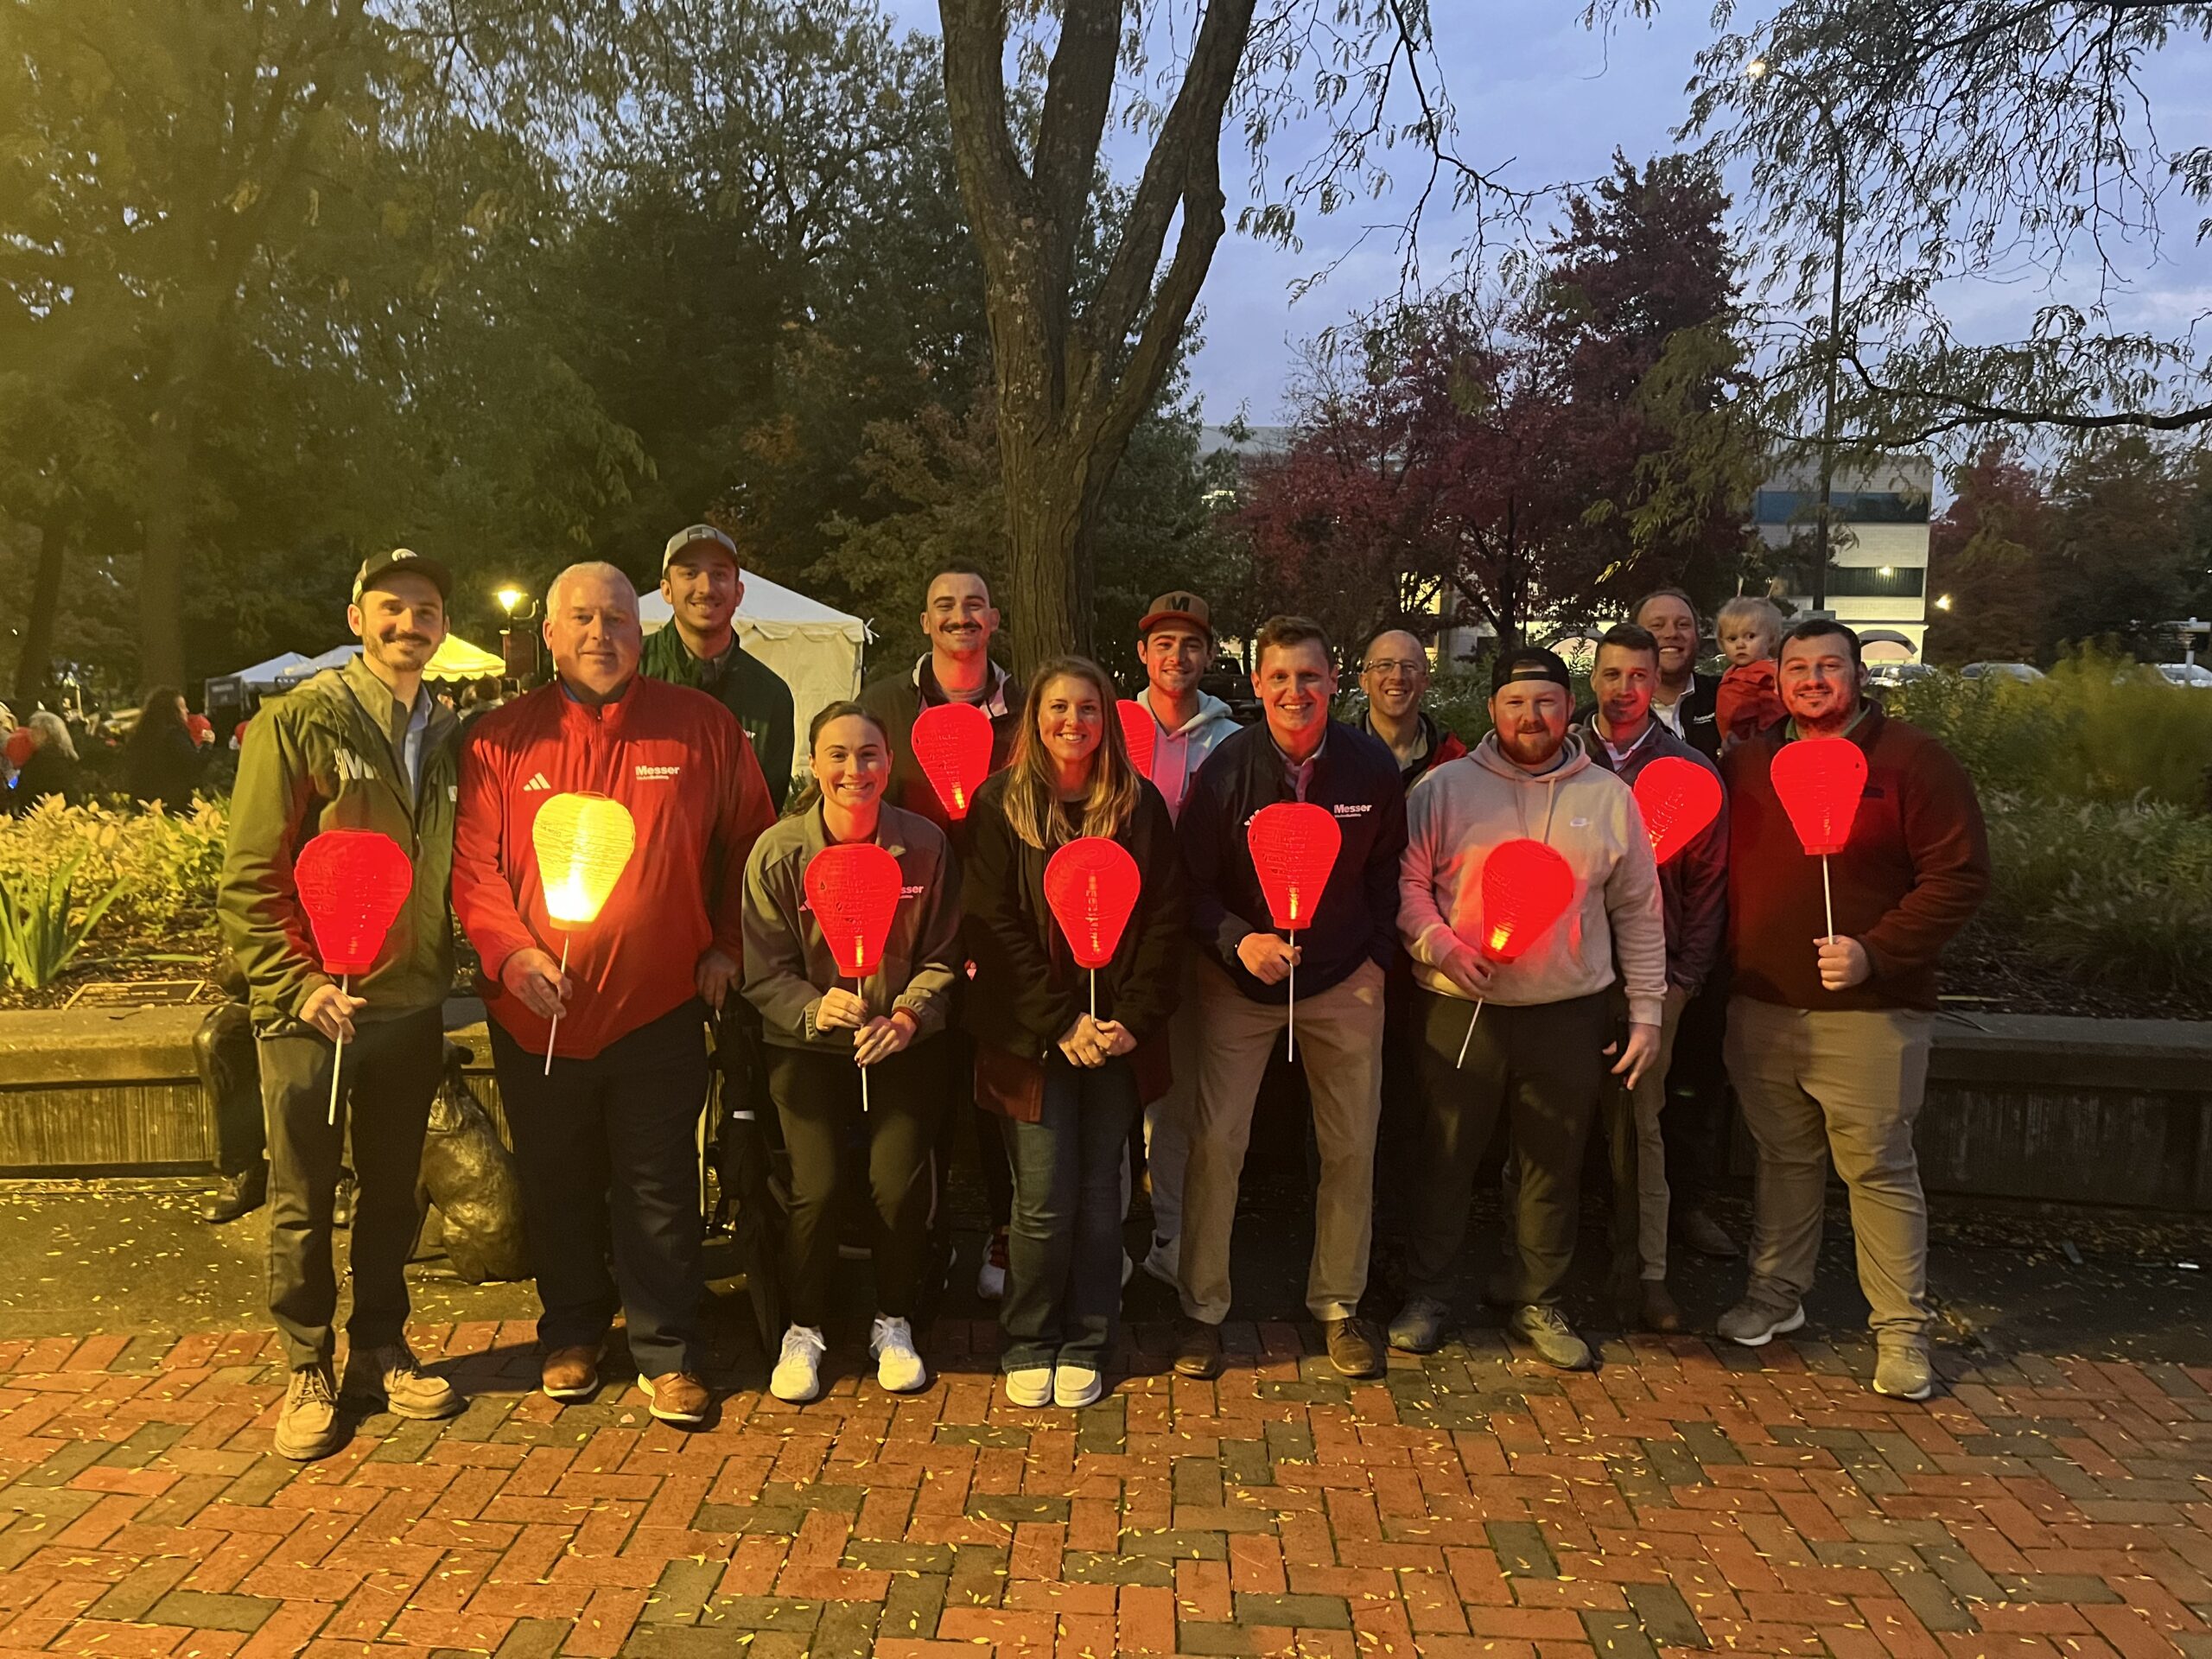 Messer Construction Company employees in Dayton holding lanterns at night for Light the Night event